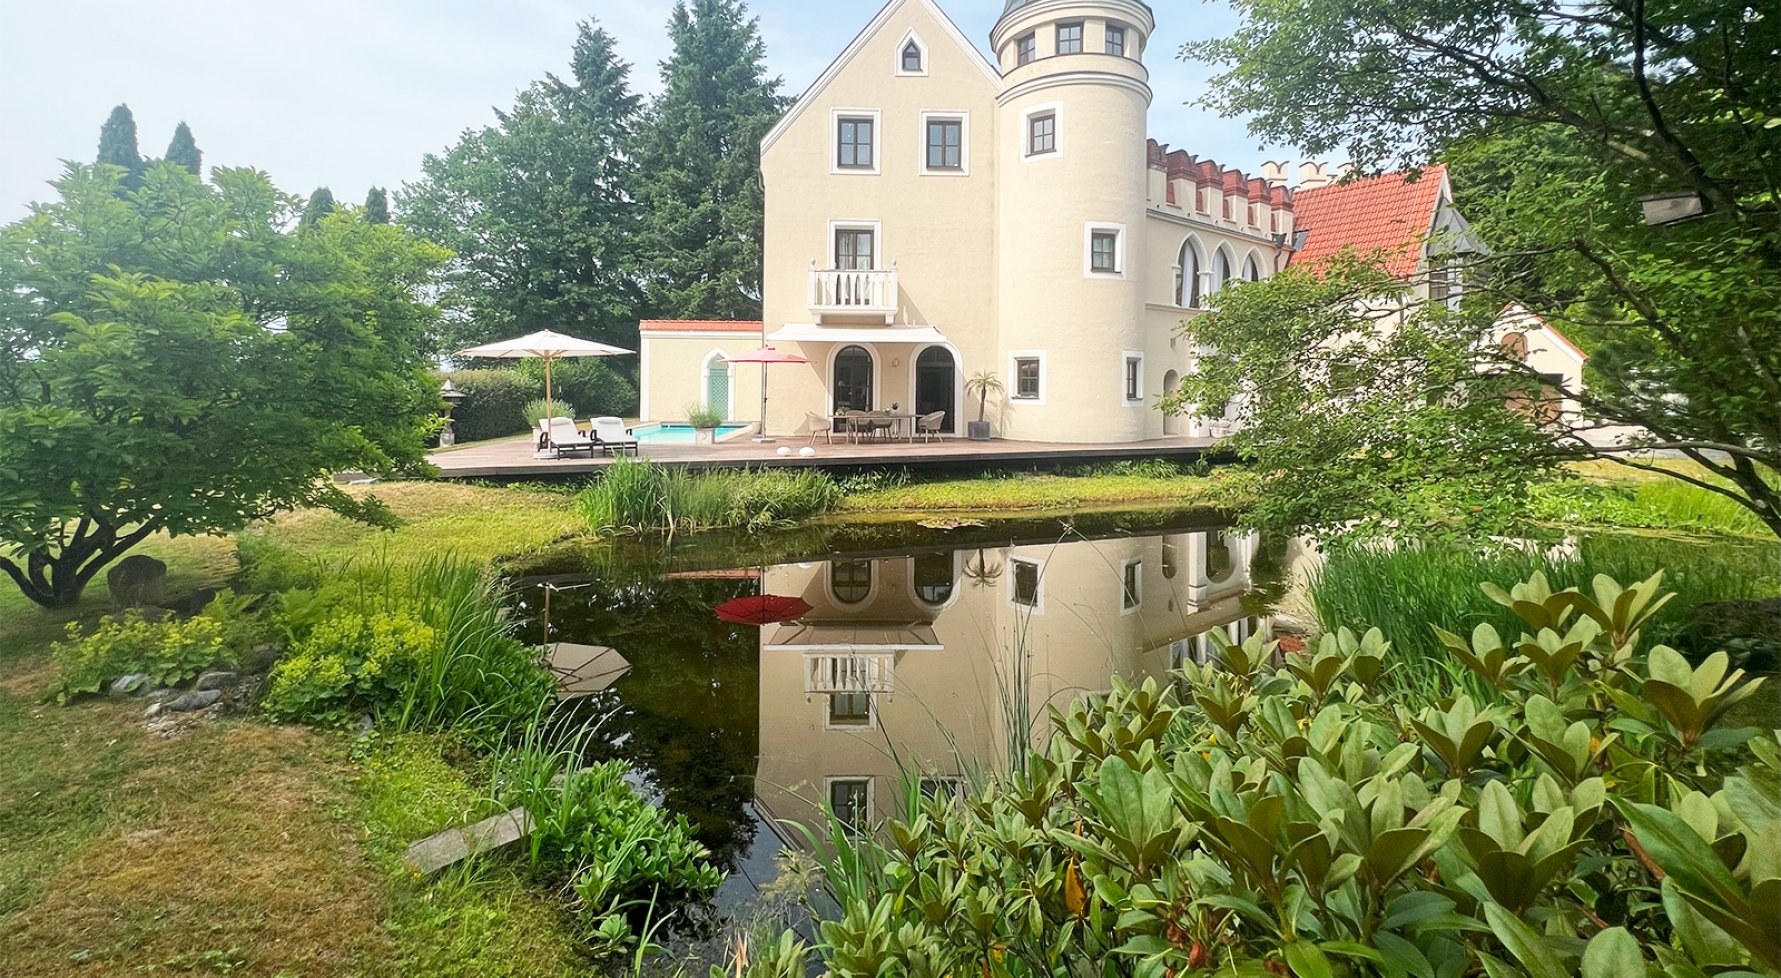 Property in 5123 Nähe Burghausen: CASTLE VIEW! Elegant little castle with a view of Burghausen - picture 1